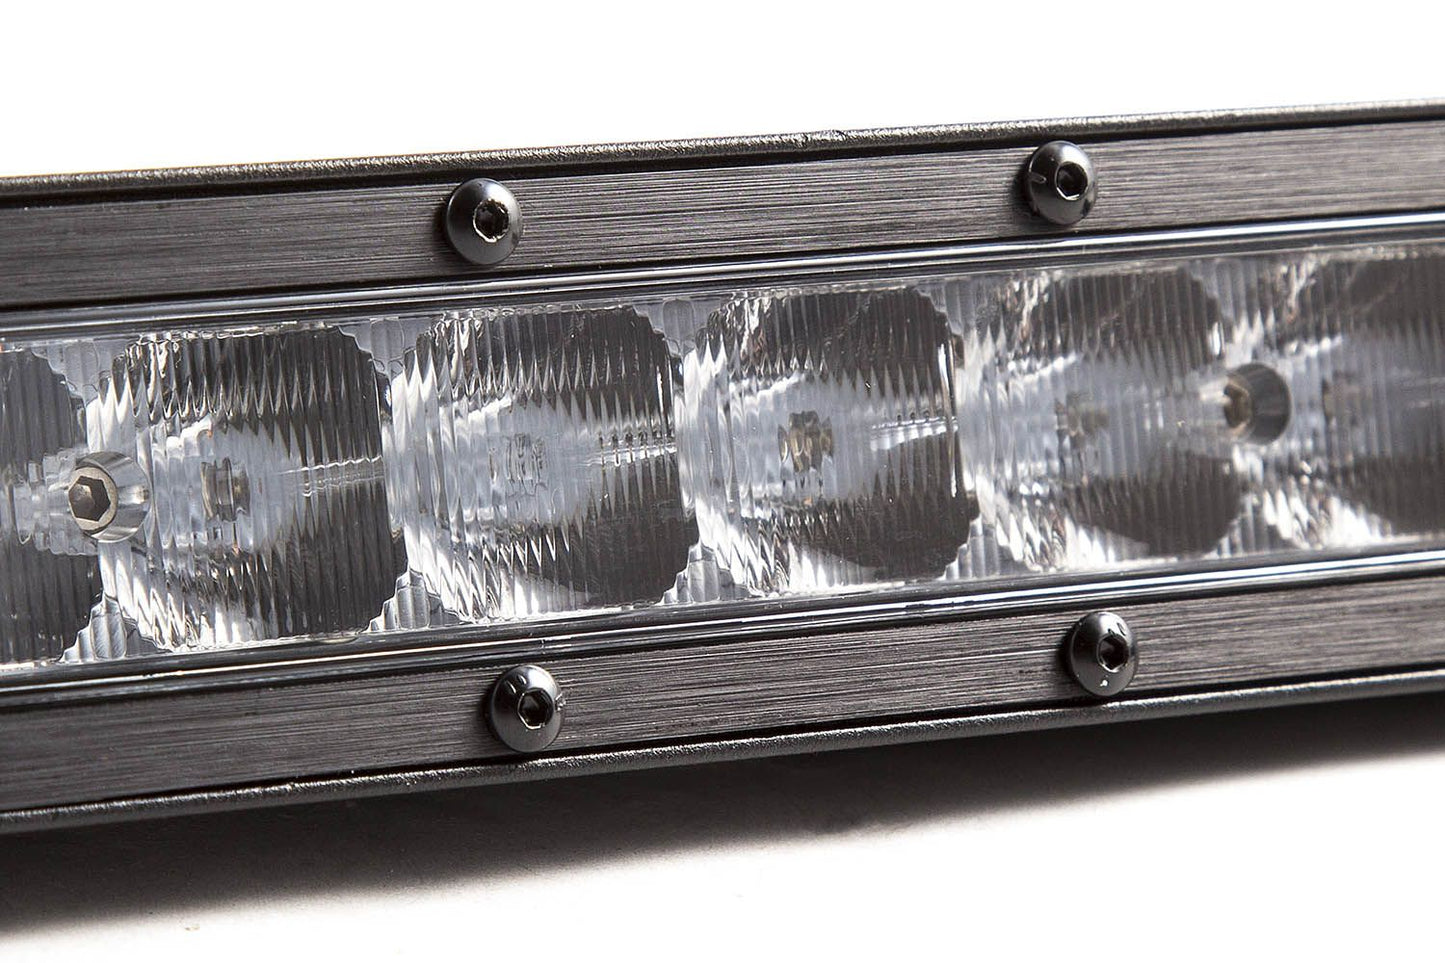 Stage Series 42" Light Bar -by Diode Dynamics